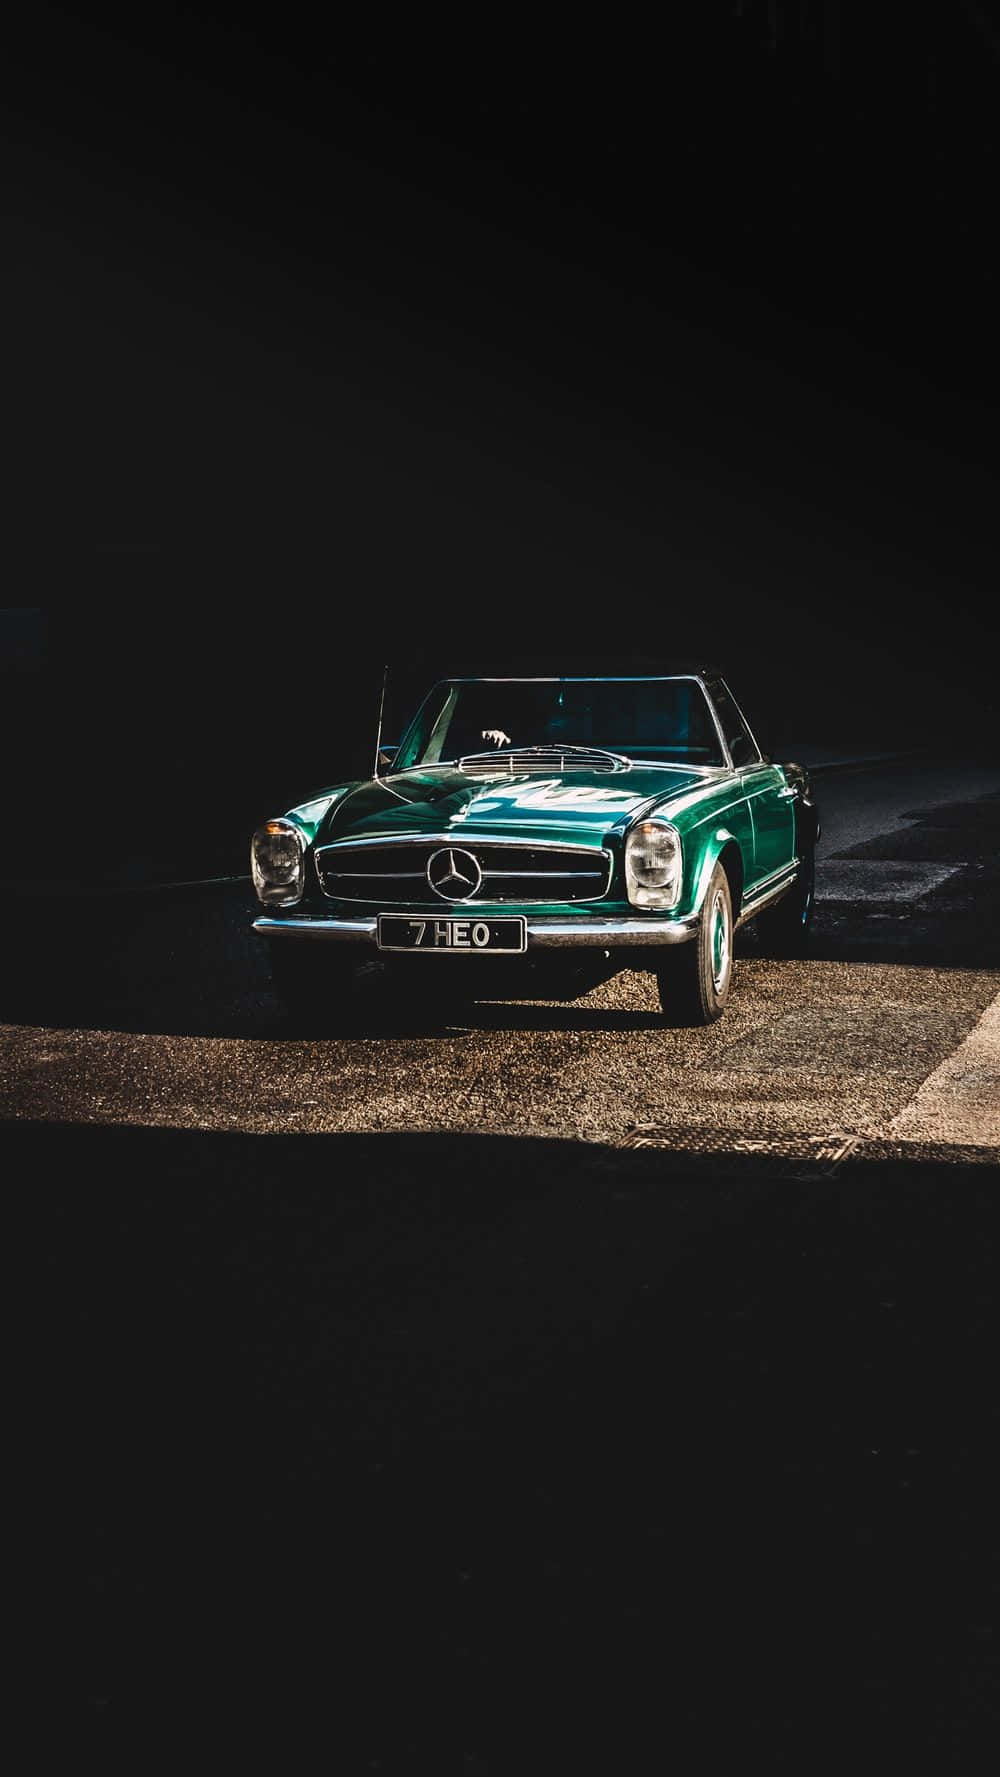 Capturing a Moment of Luxury – A Classic Mercedes Wallpaper